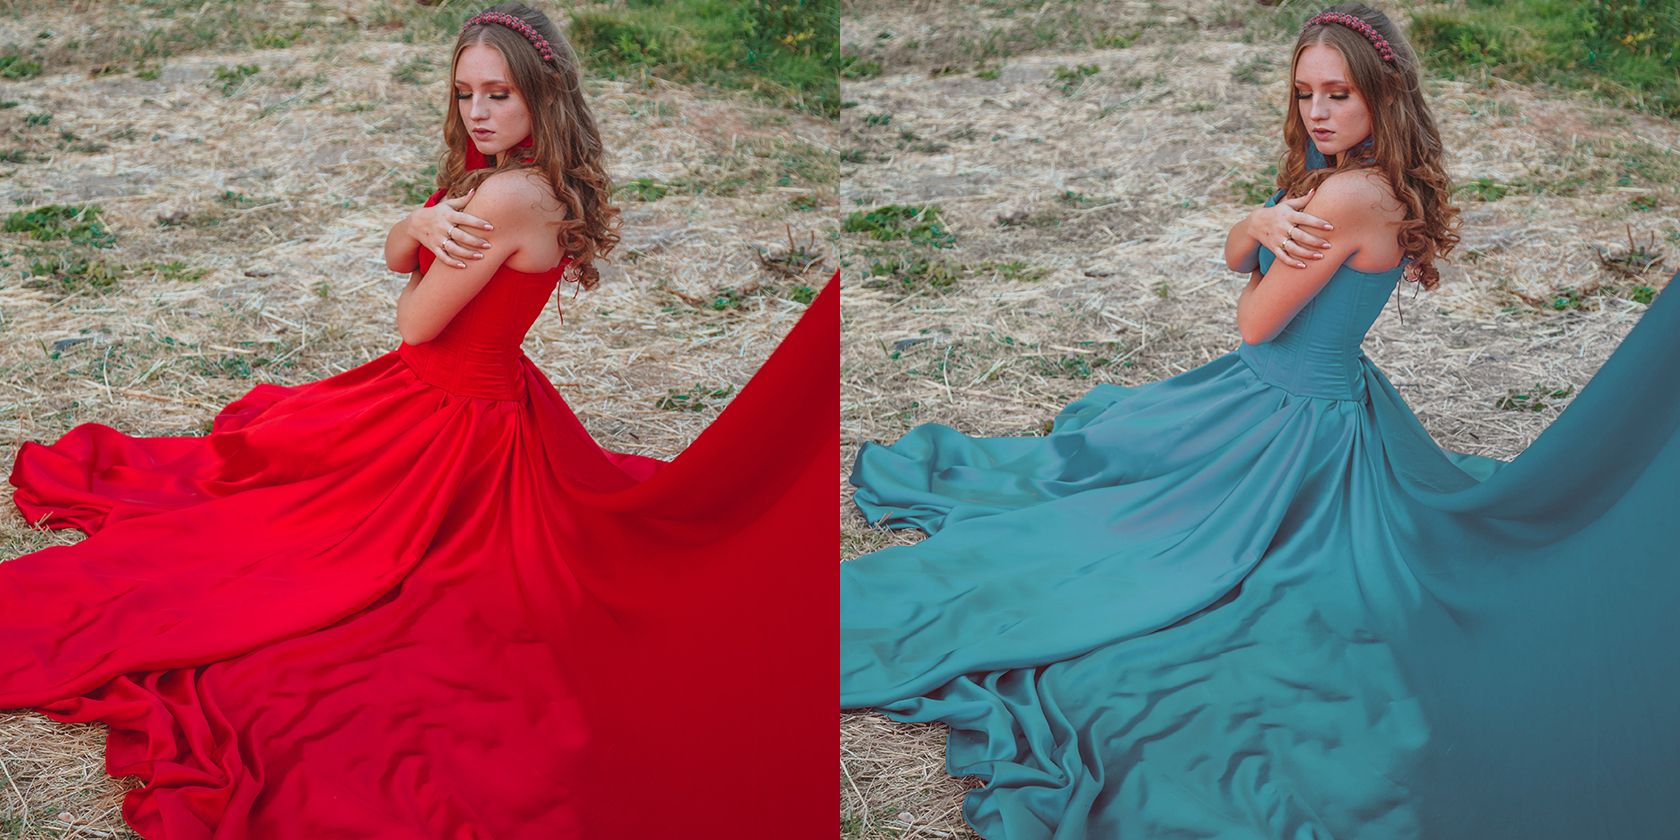 3 Methods for Changing the Color of an Image in Photoshop 